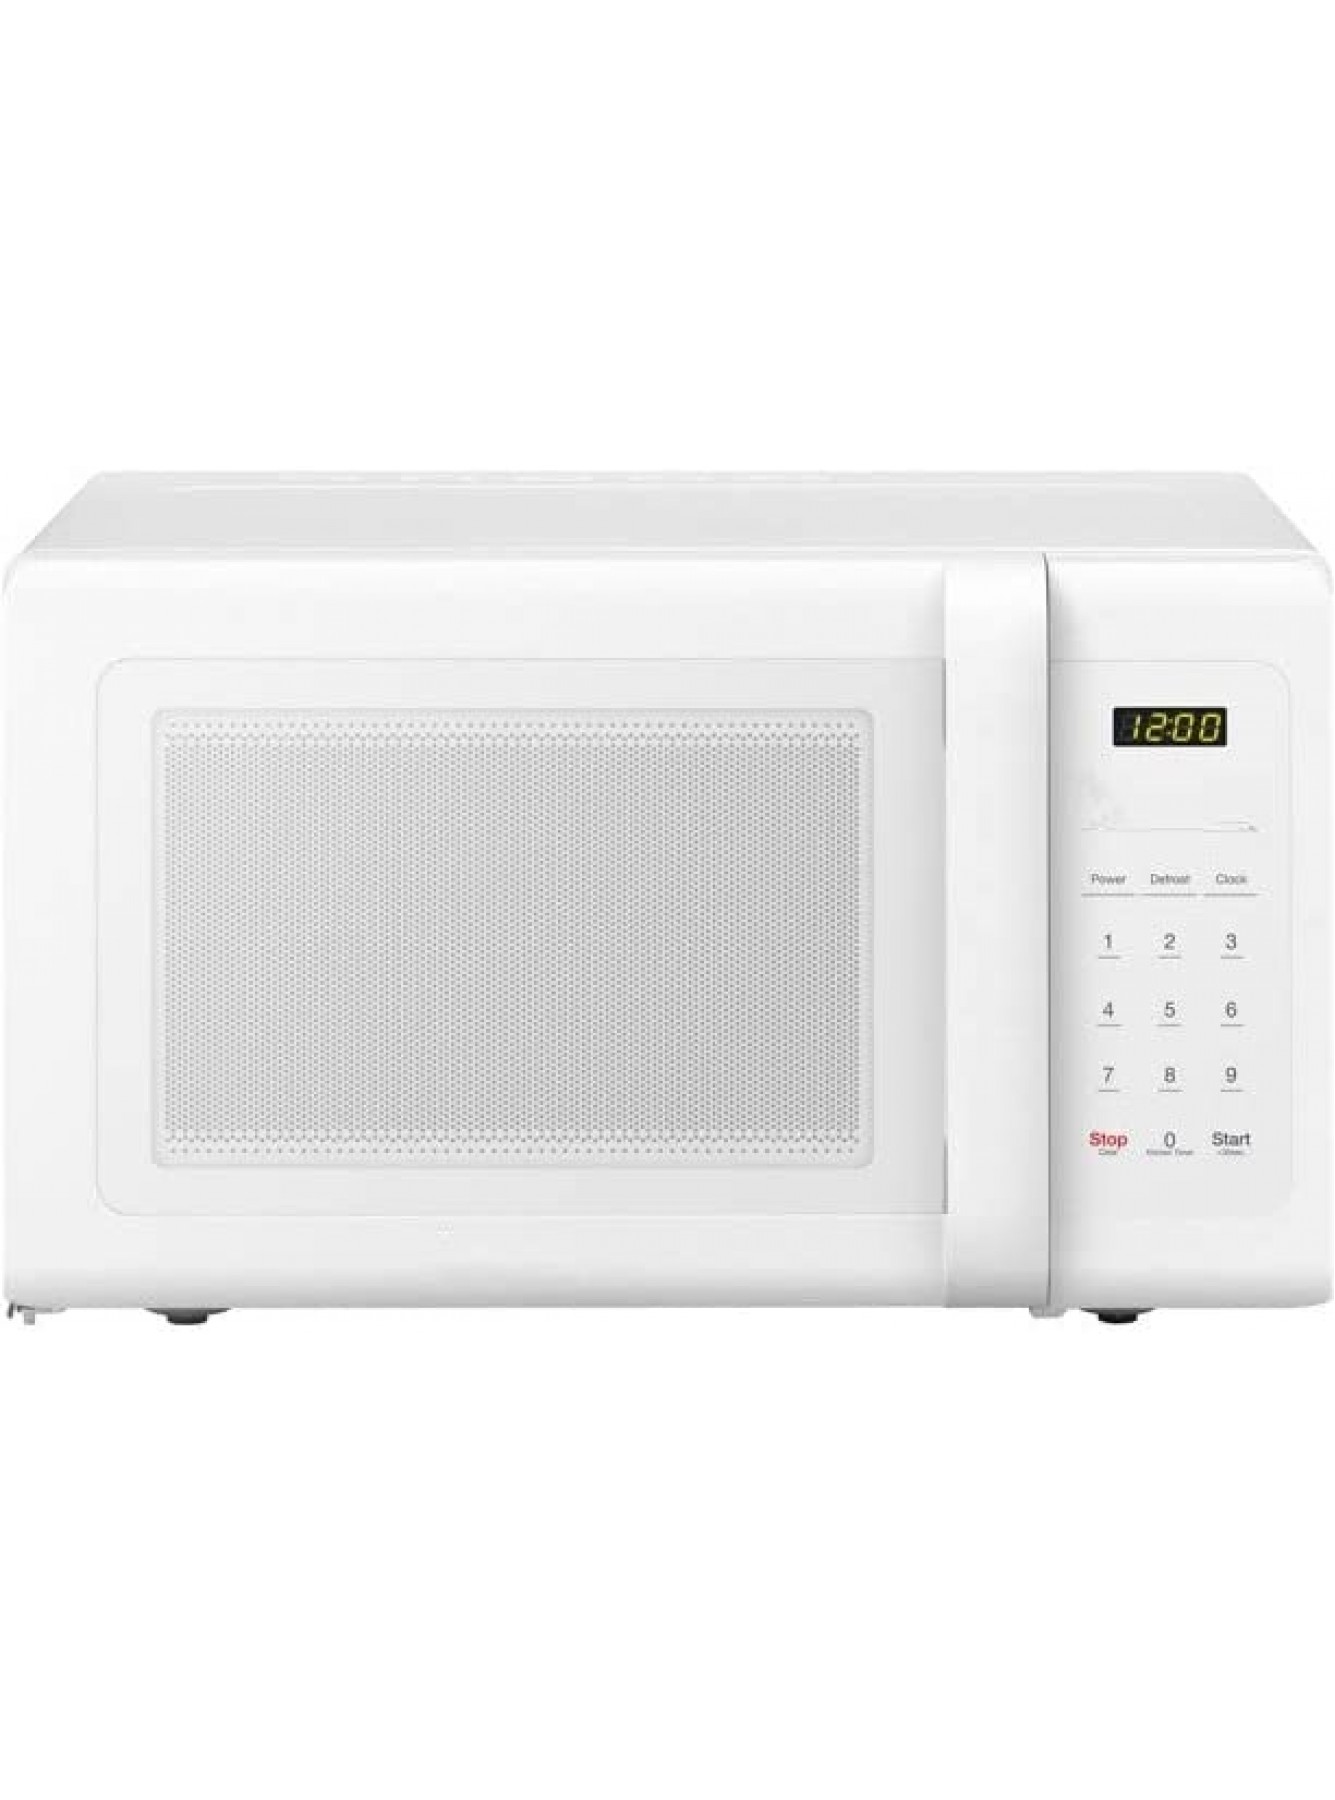 0.9 Cu. Ft. 900W Countertop Microwave Oven in White,21.20 x 17.50 x 11.00 Inches B0B2MPV97M